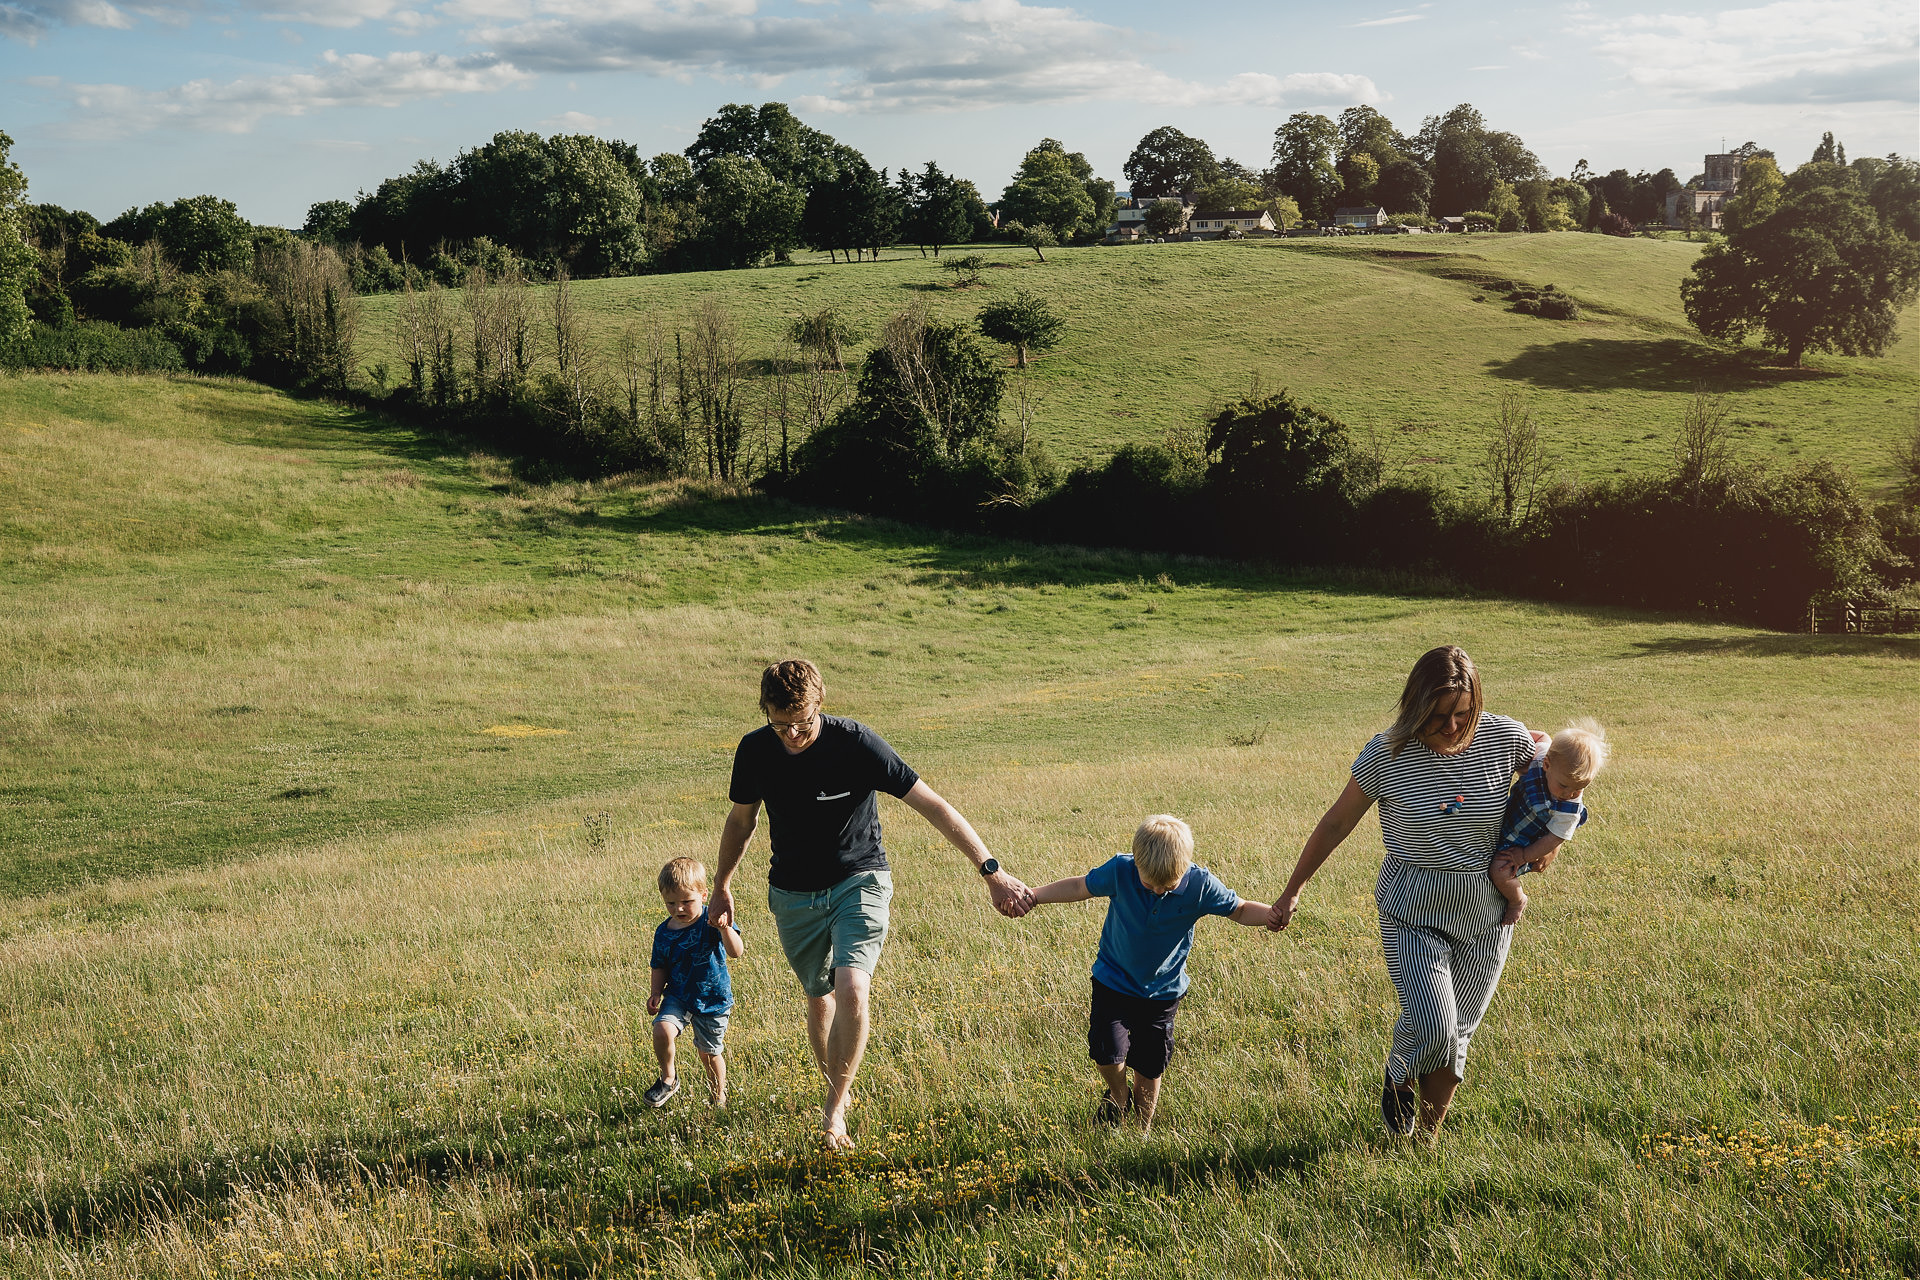 A family walking hand in hand in evening sunshine with a church on the hills behind them